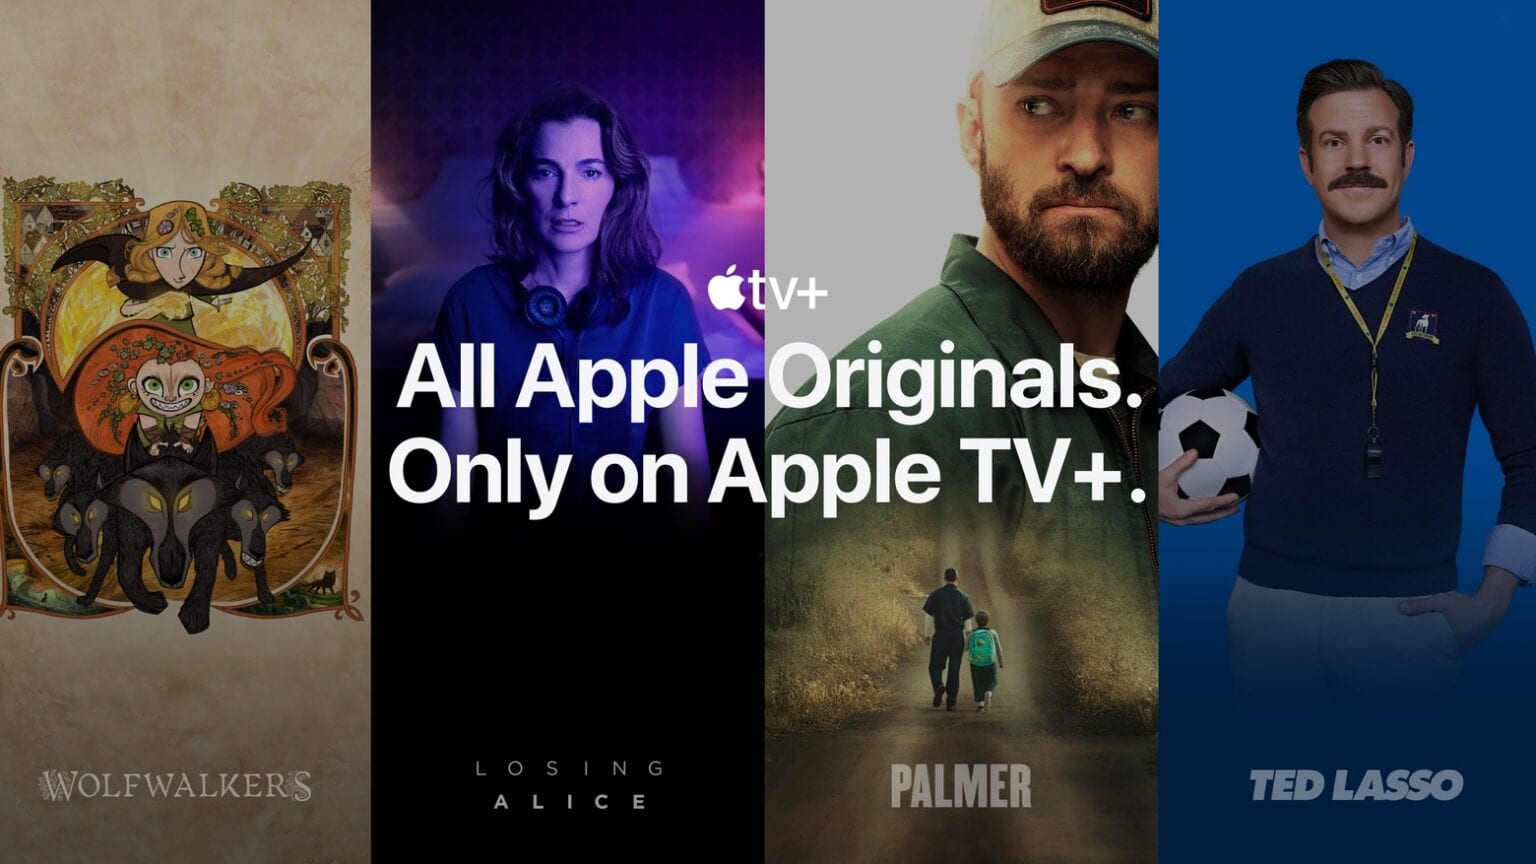 Your free Apple TV+ trial just got even sweeter.